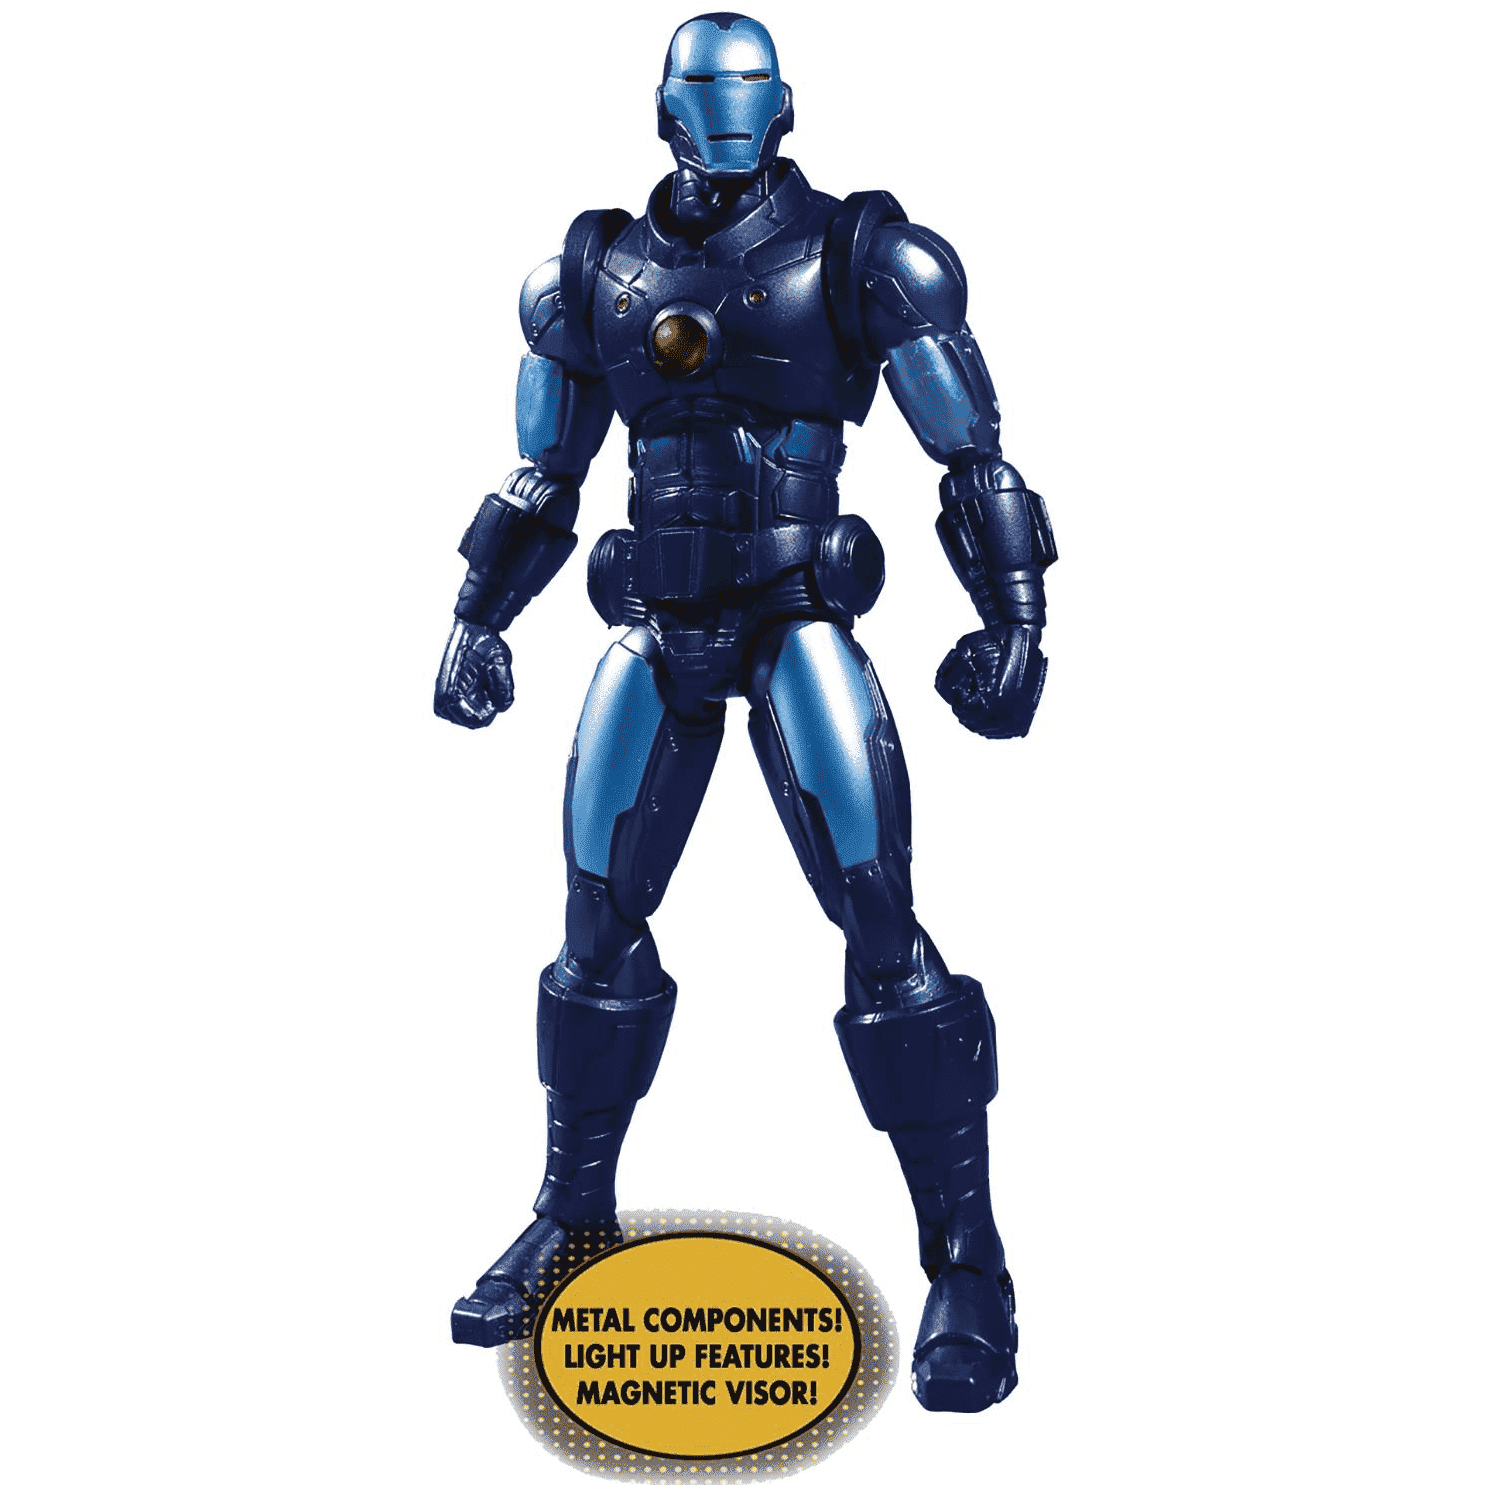 Image of ONE:12 Collective Marvel Px Iron Man Stealth Armor - FEBRUARY 2019